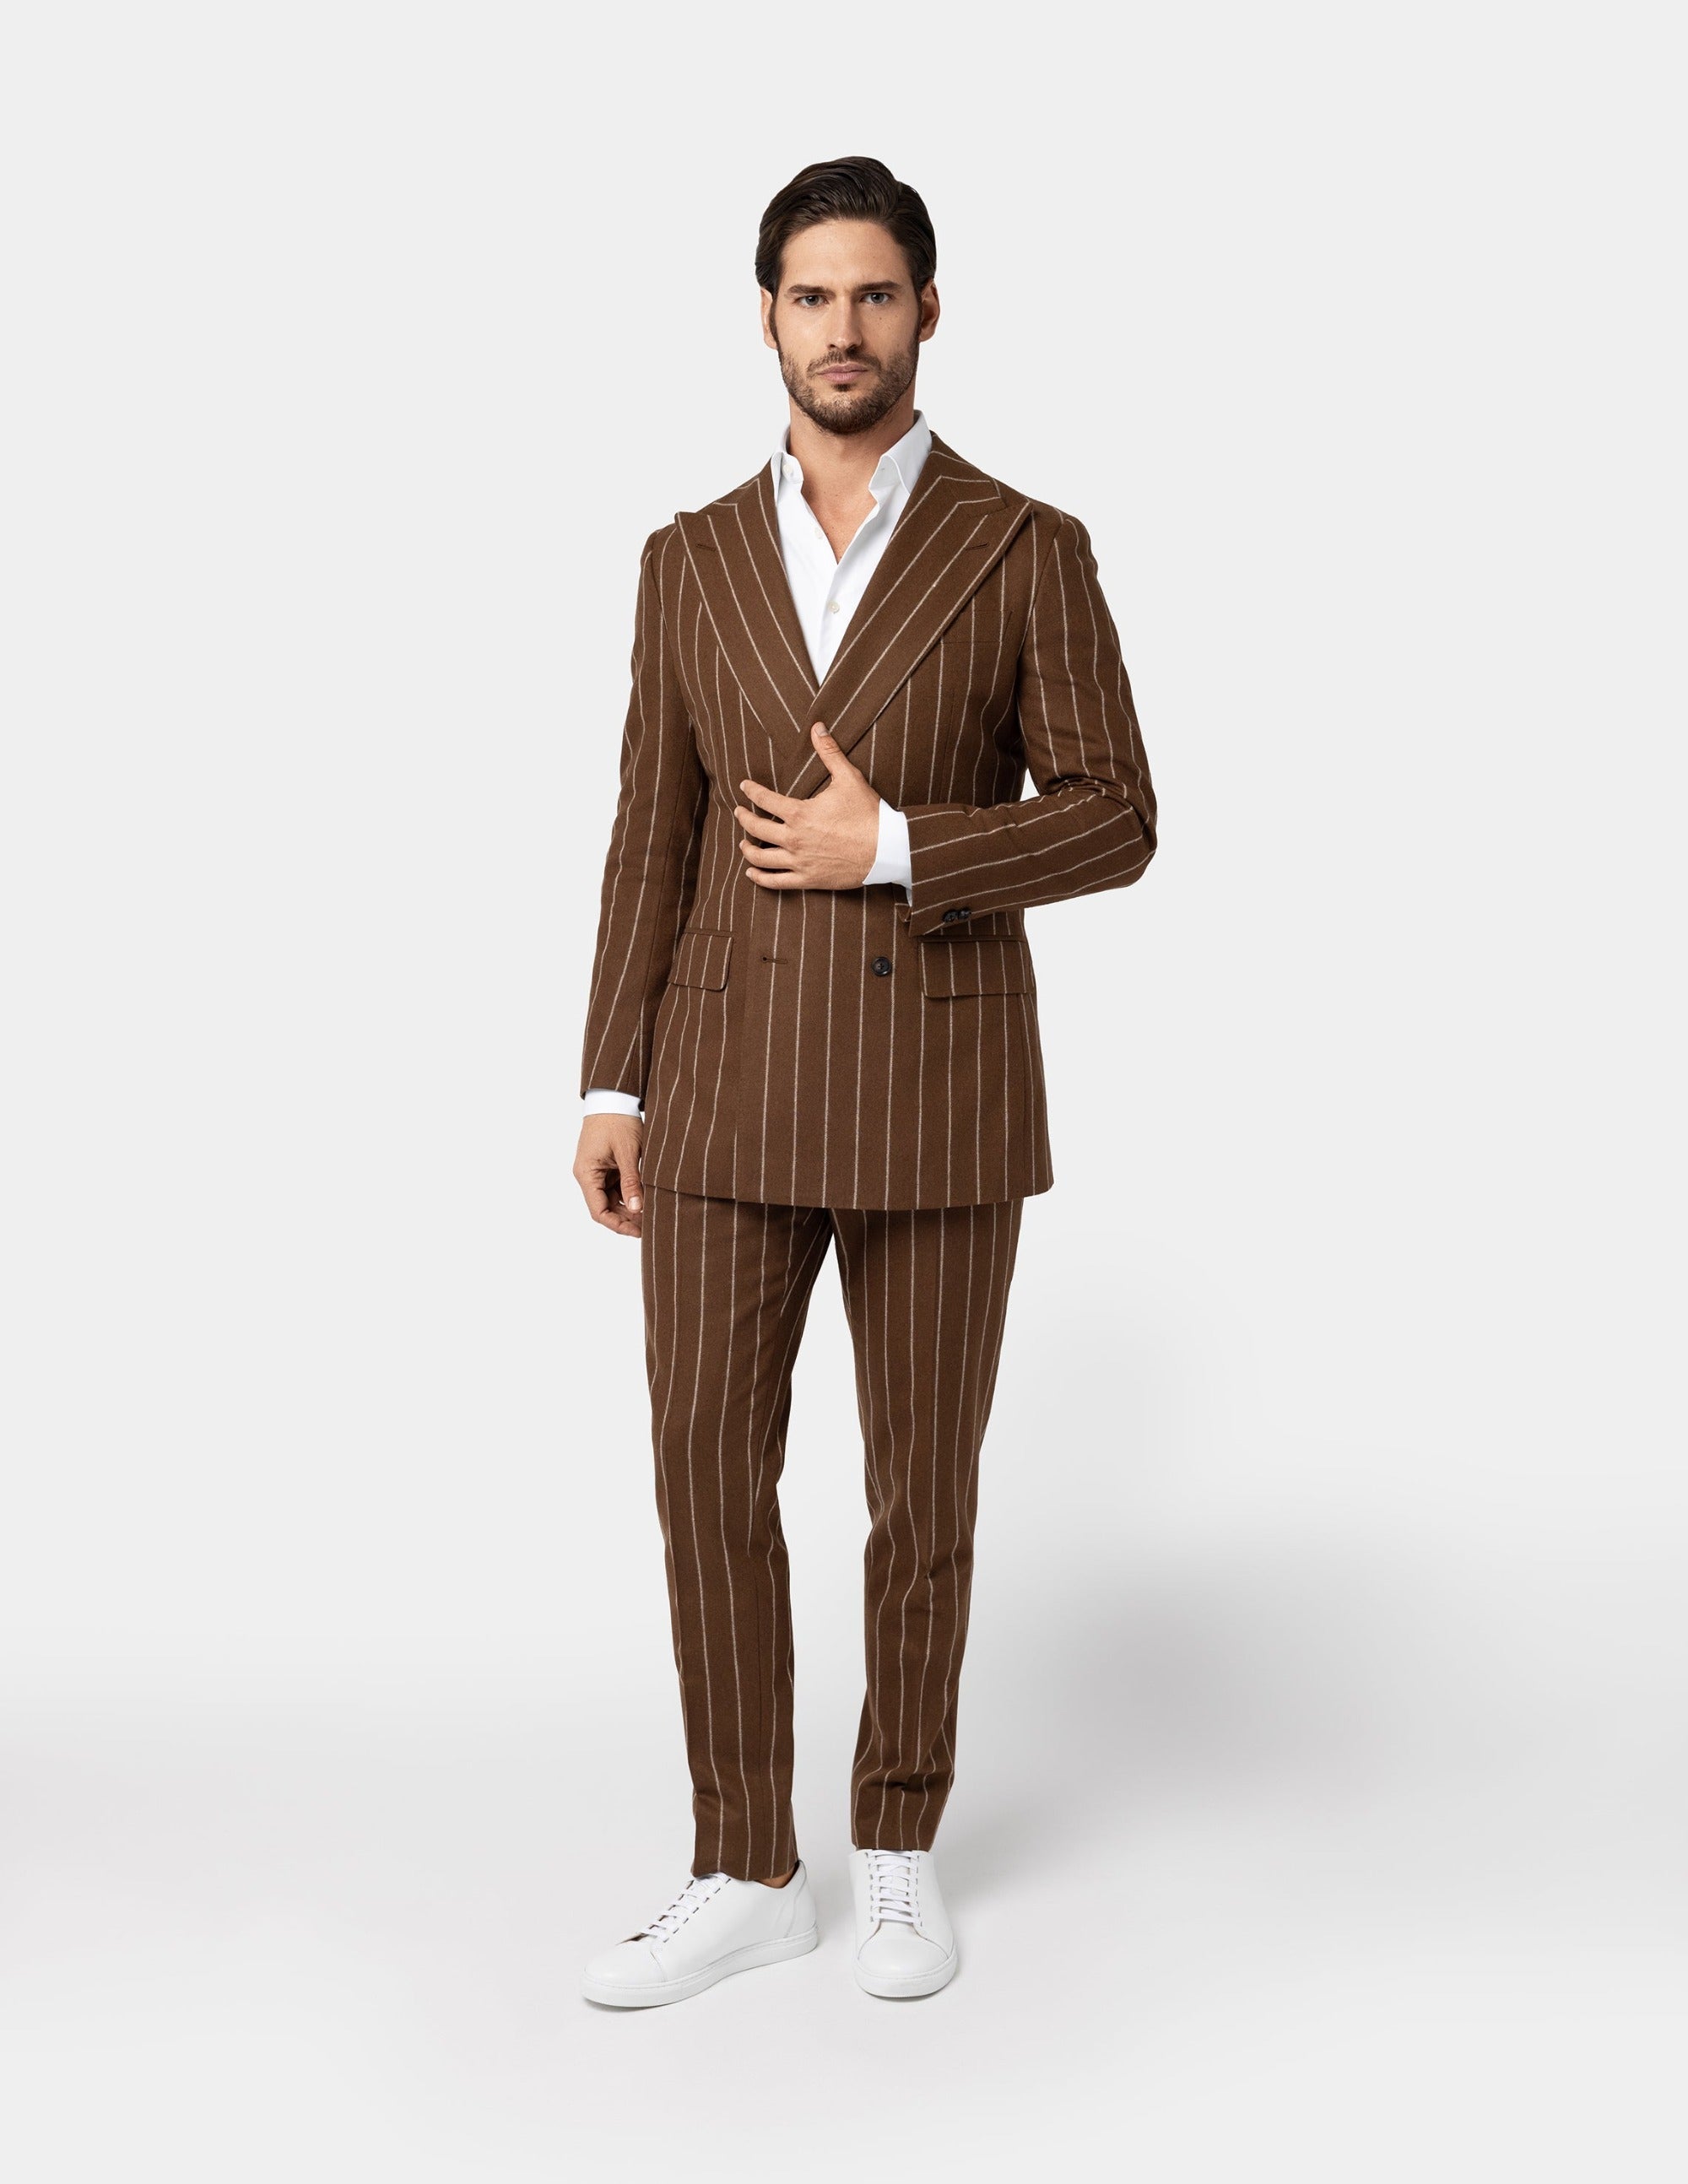 Bisonte Off-white Double Breasted Suit - Samir Bachkami